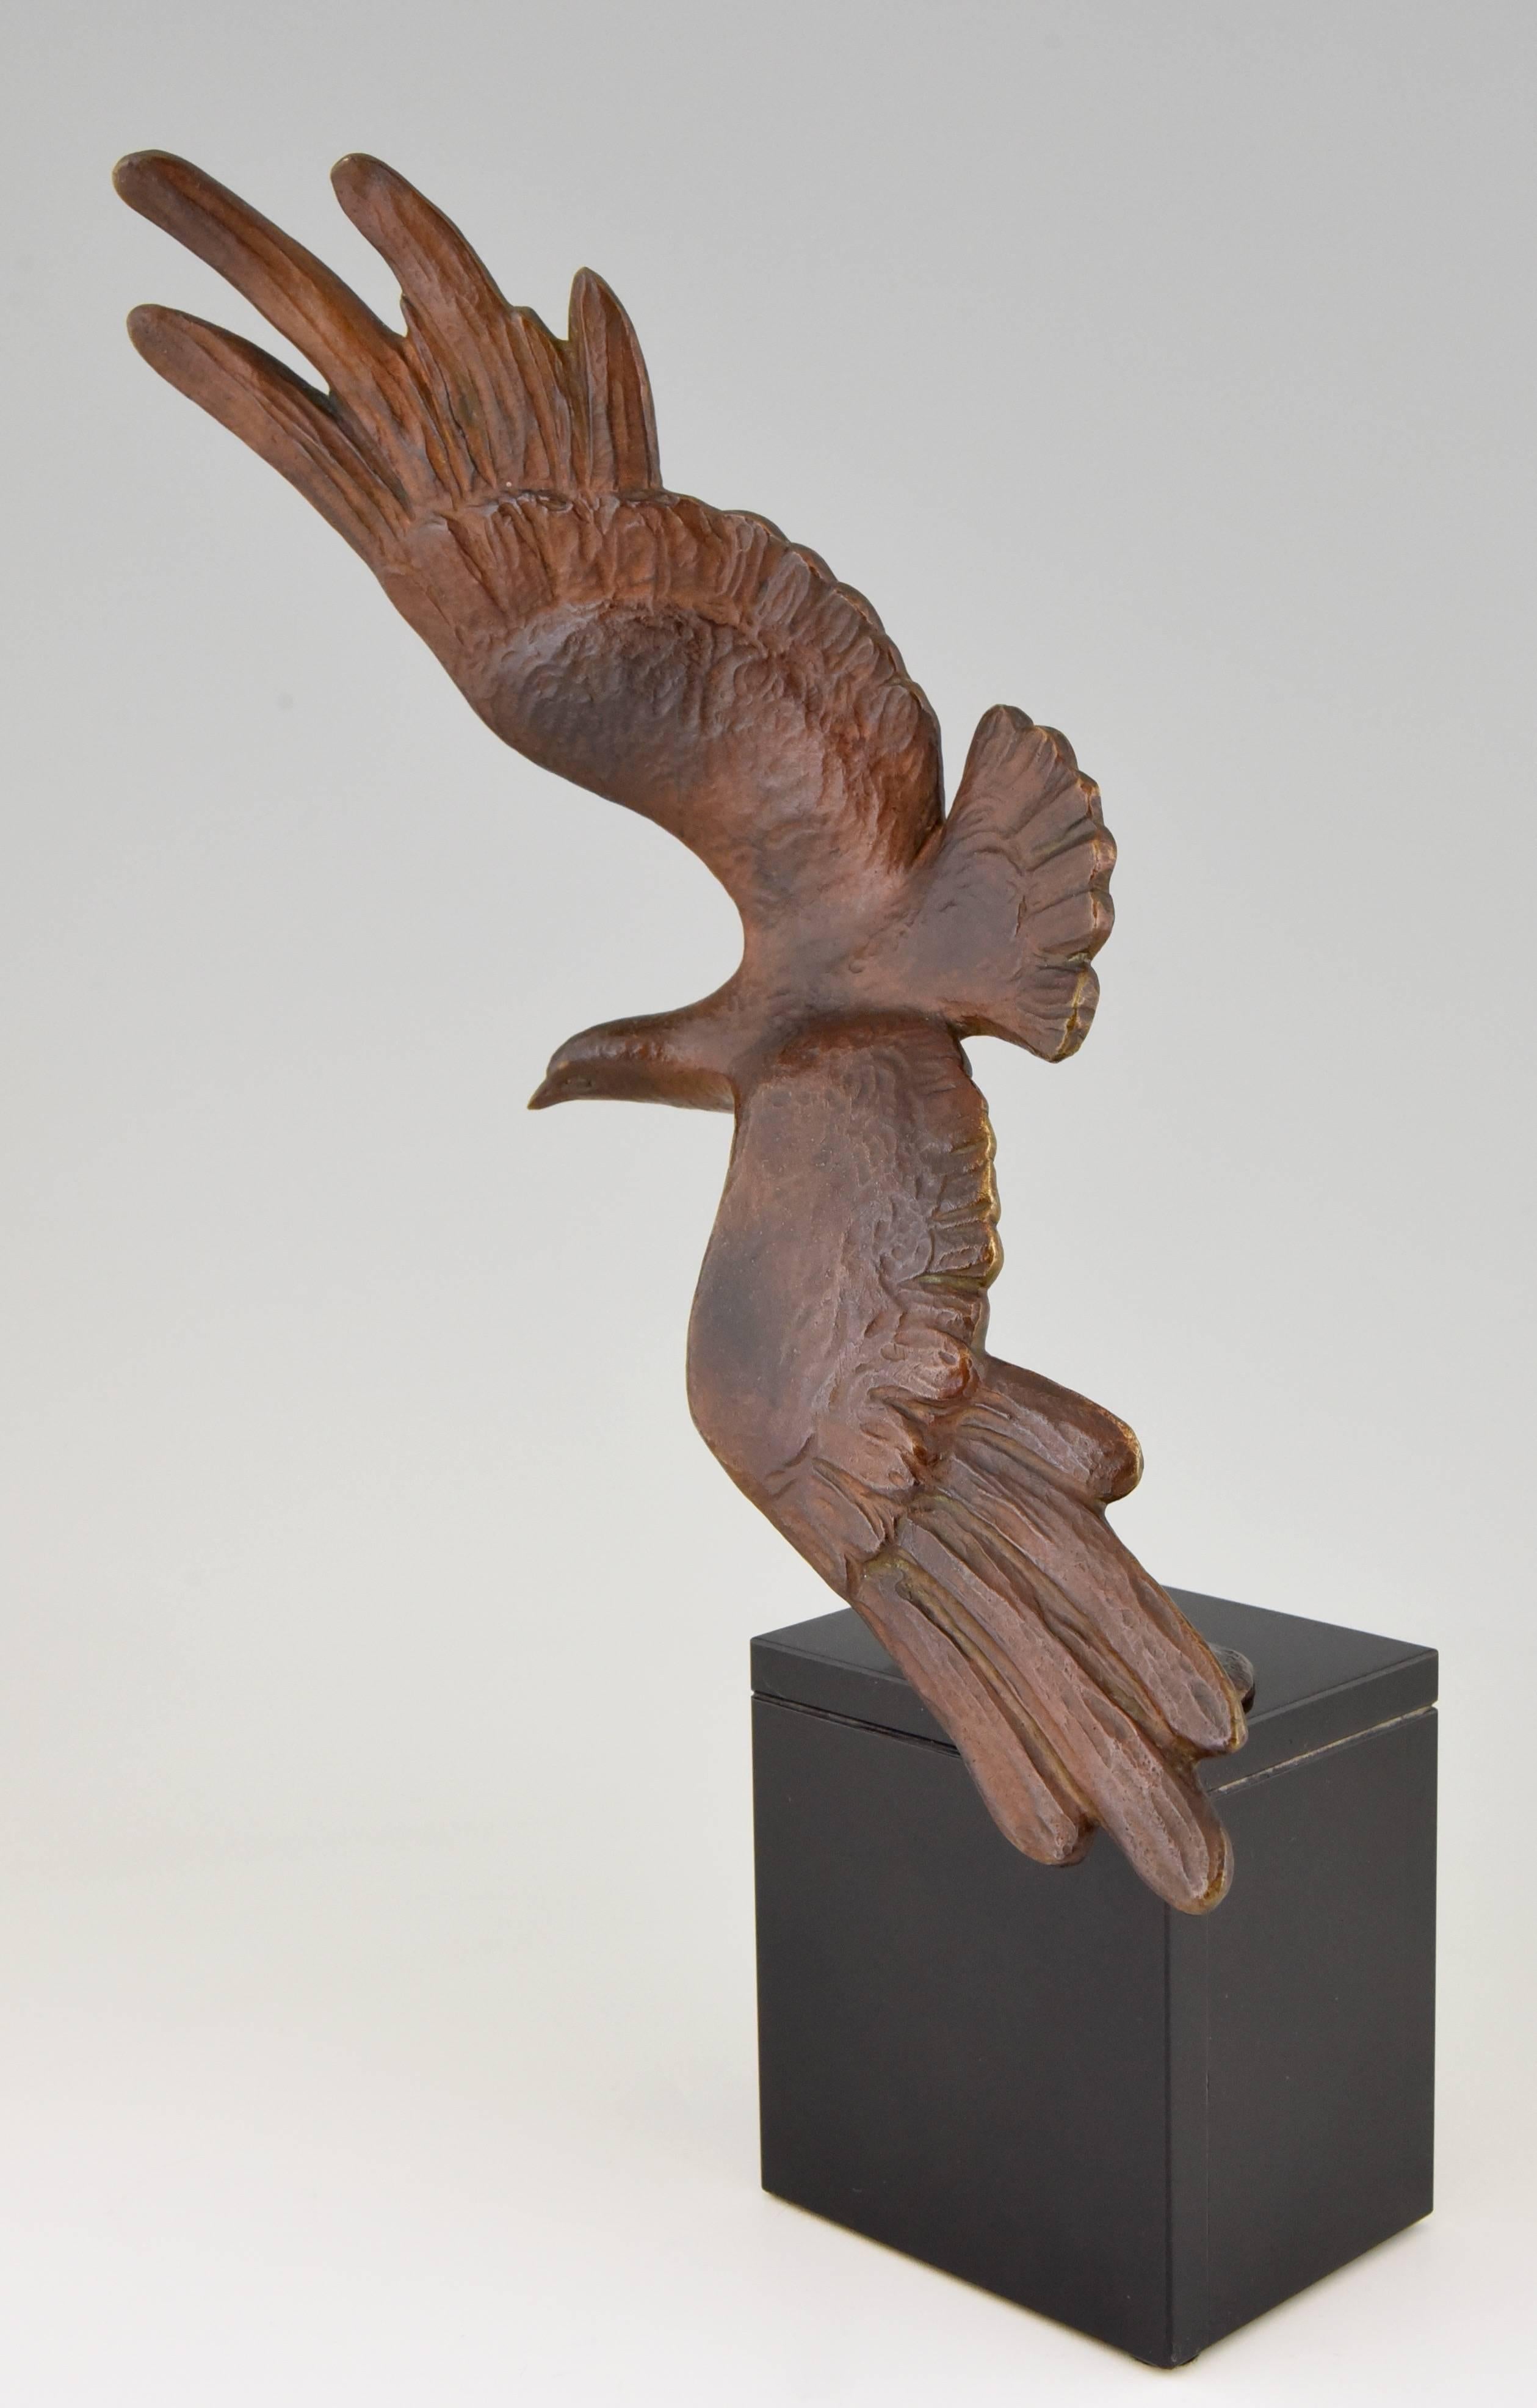 Bronze sculpture of a seagull in flight.
By Alexandre ?Kelety
Signature / Marks : ?A. Kelety.? Etling Paris foundry. 

Size: ?
H. 36.5 cm x L. 23 cm. x W. 10 cm. ?
H. 14.4 inch x L. 9 inch x W. 3.9 inch.

Literature: 
?